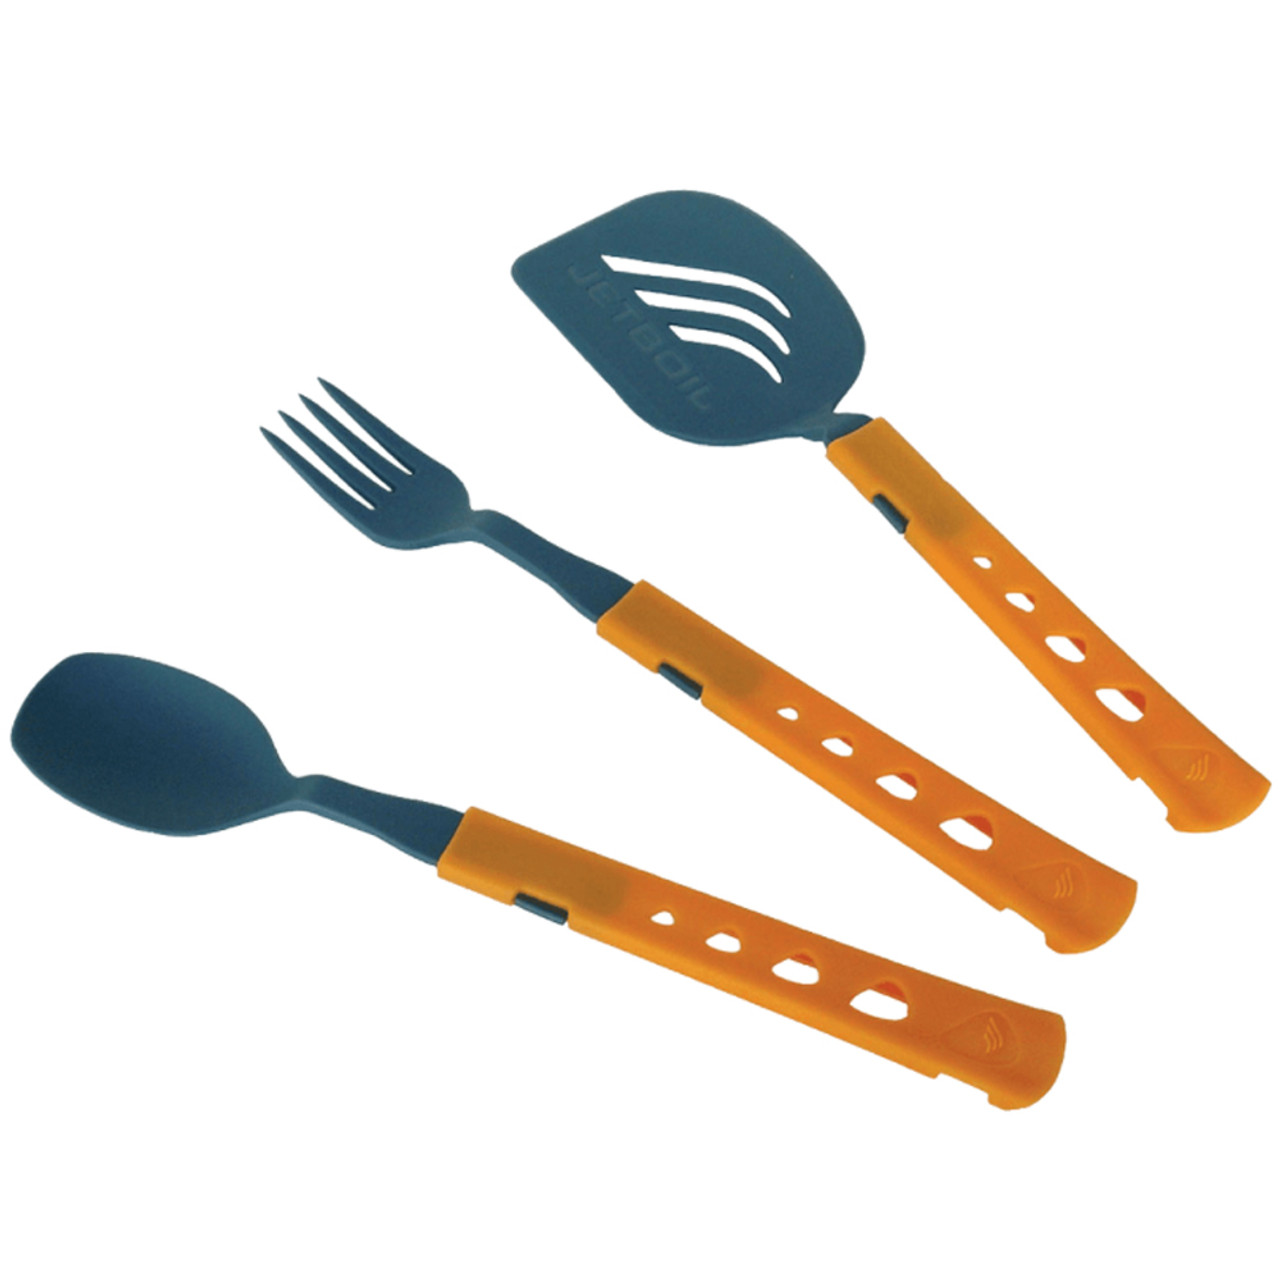 GSI Outdoors Pack Spoon/Spatula Set, One Size